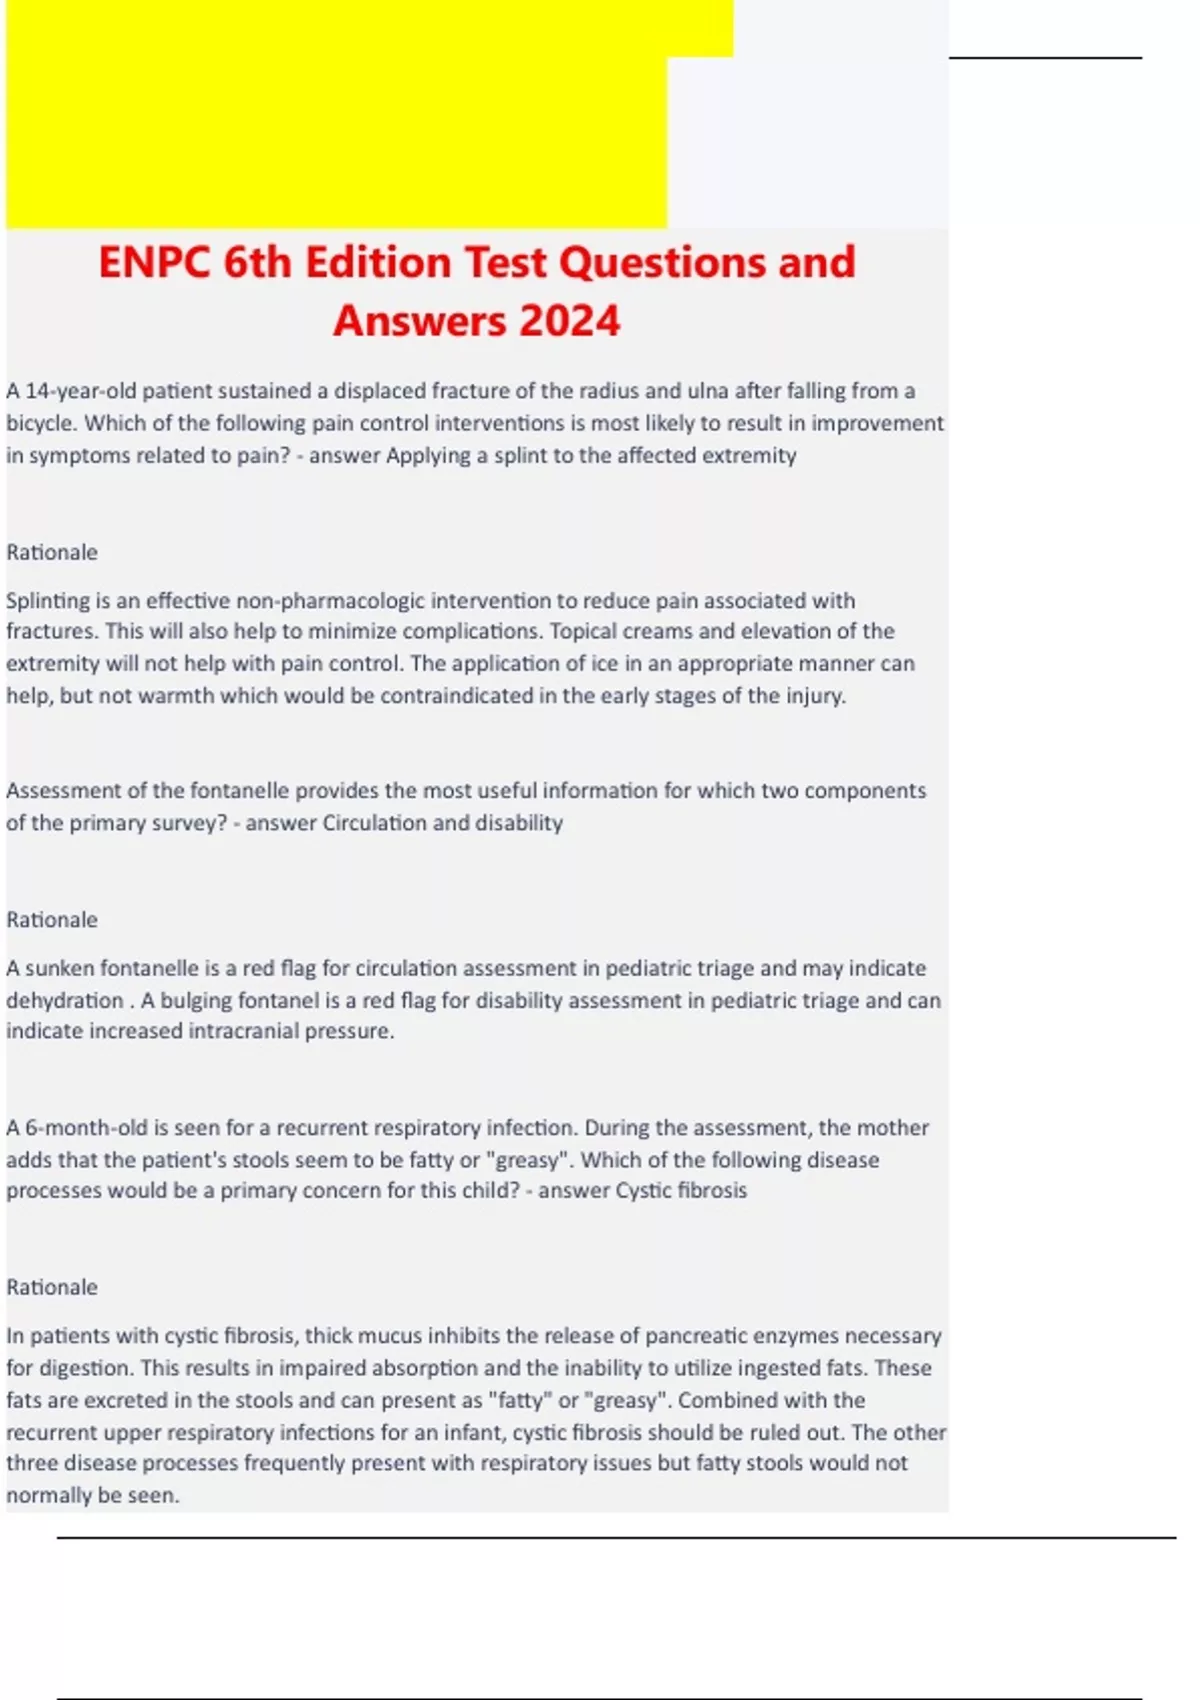 ENPC 6th Edition Test Questions and Answers 2024 Advance nursing